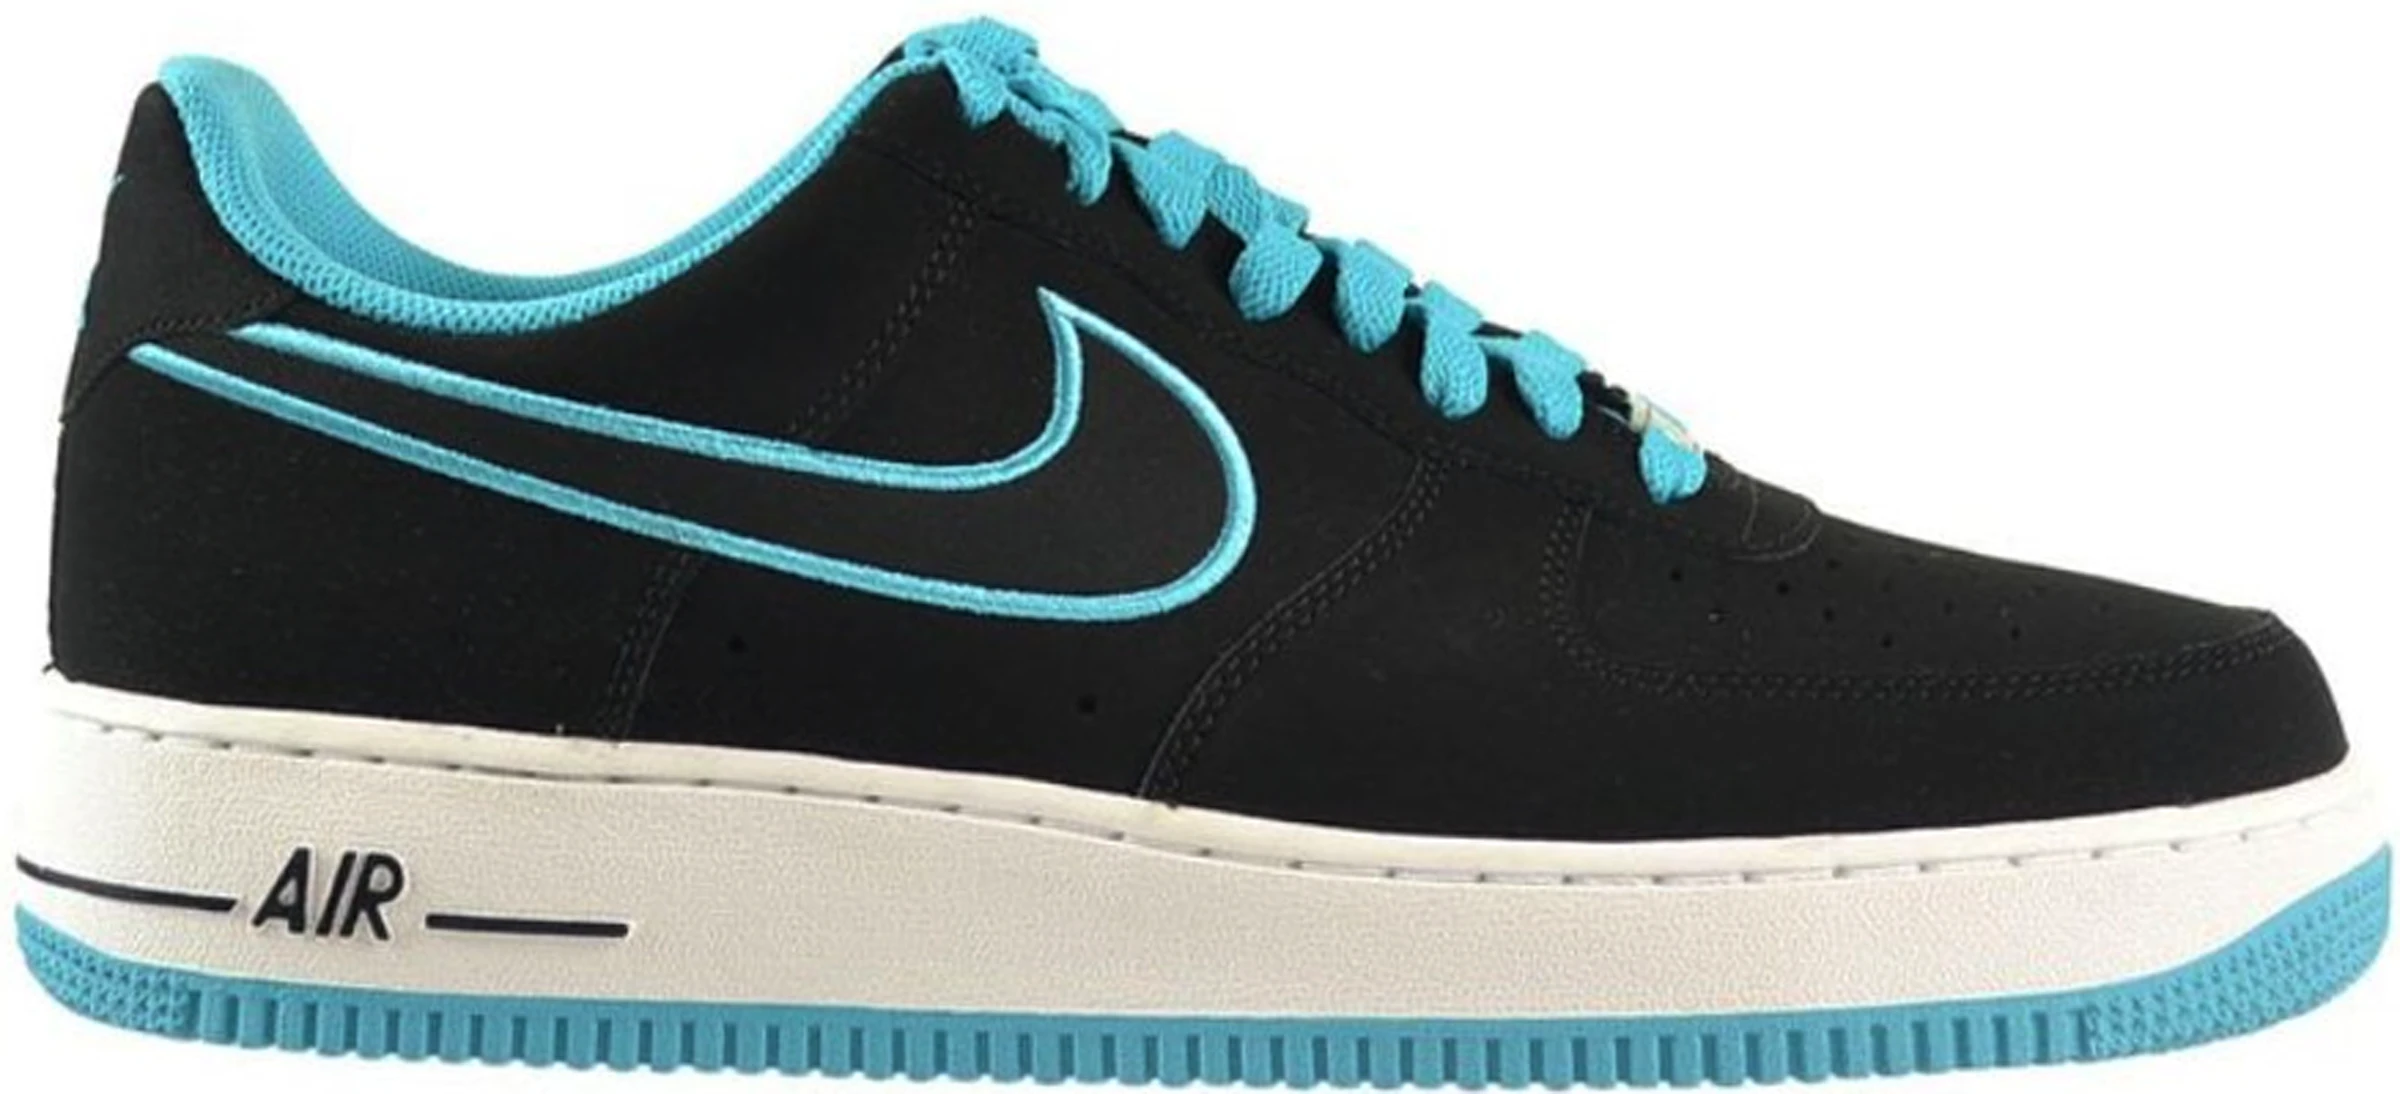 Air Force 1 Low Black Turquoise - 488298-011 -